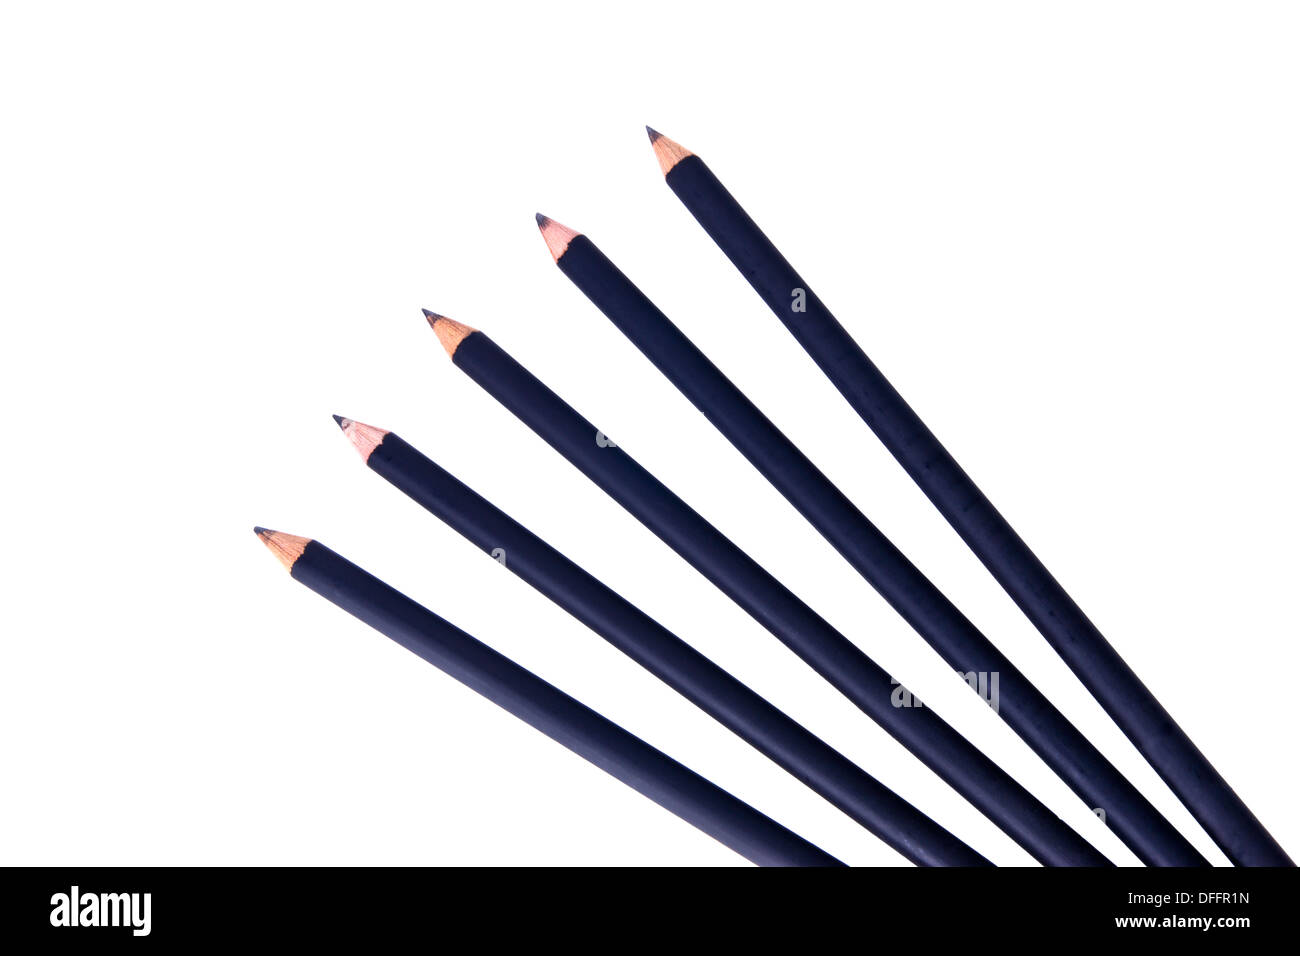 Five Pencils Separated on White Background Stock Photo